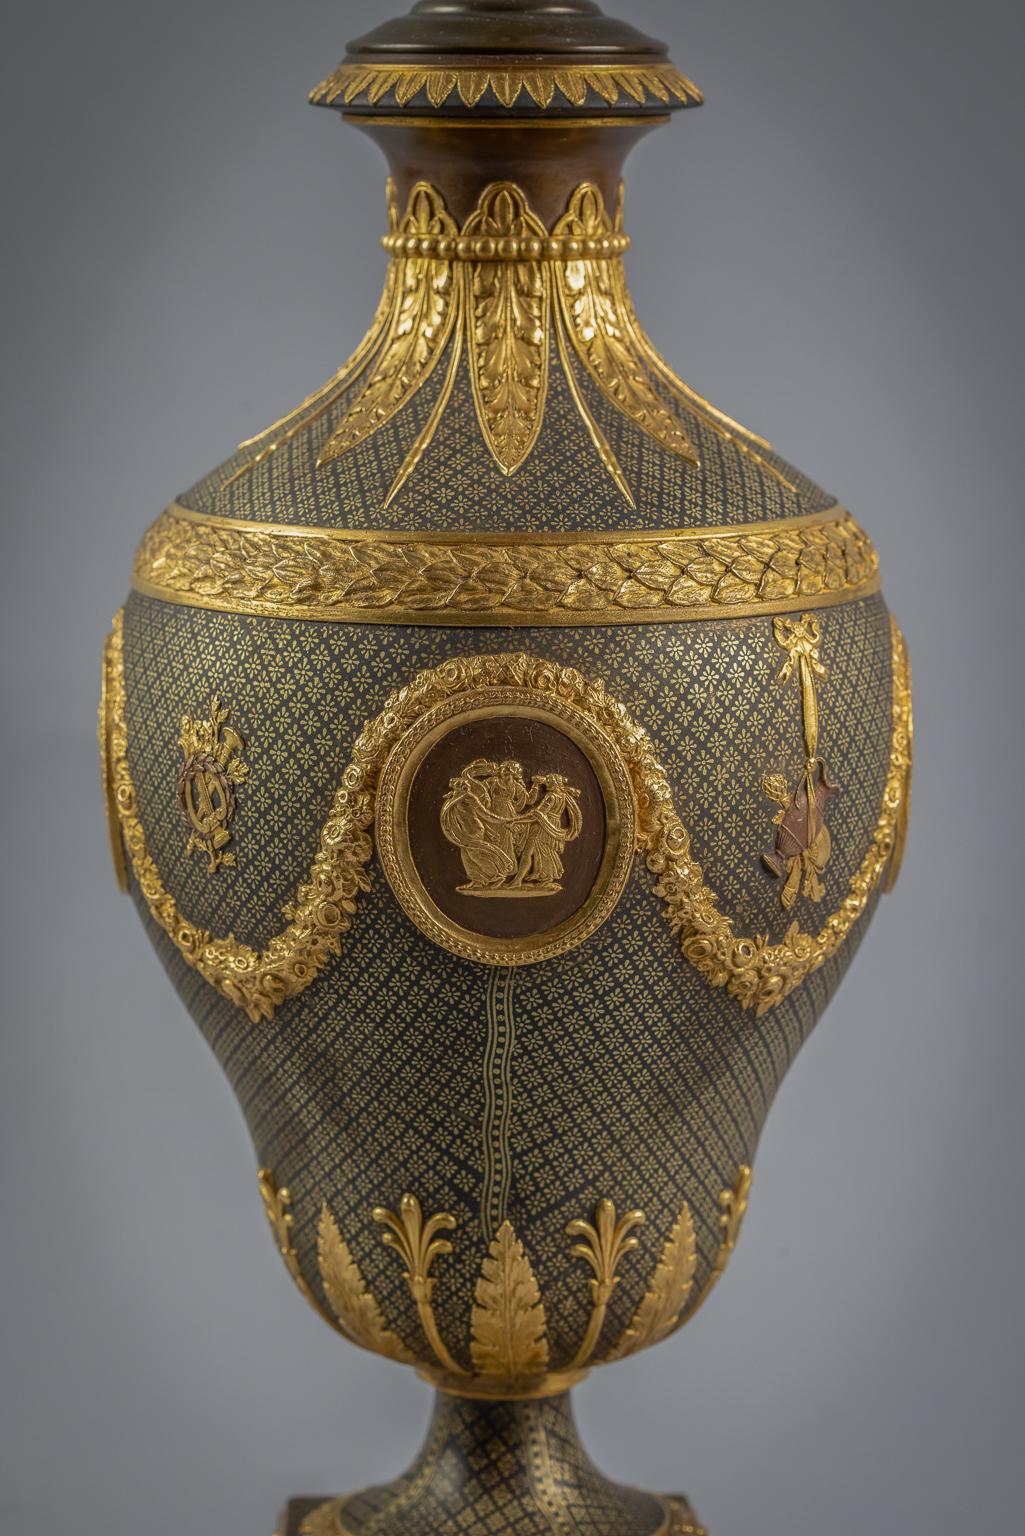 Wedgwood Black Porcelain and Gilt Covered Urn Mounted as Lamp, 19th Century For Sale 1